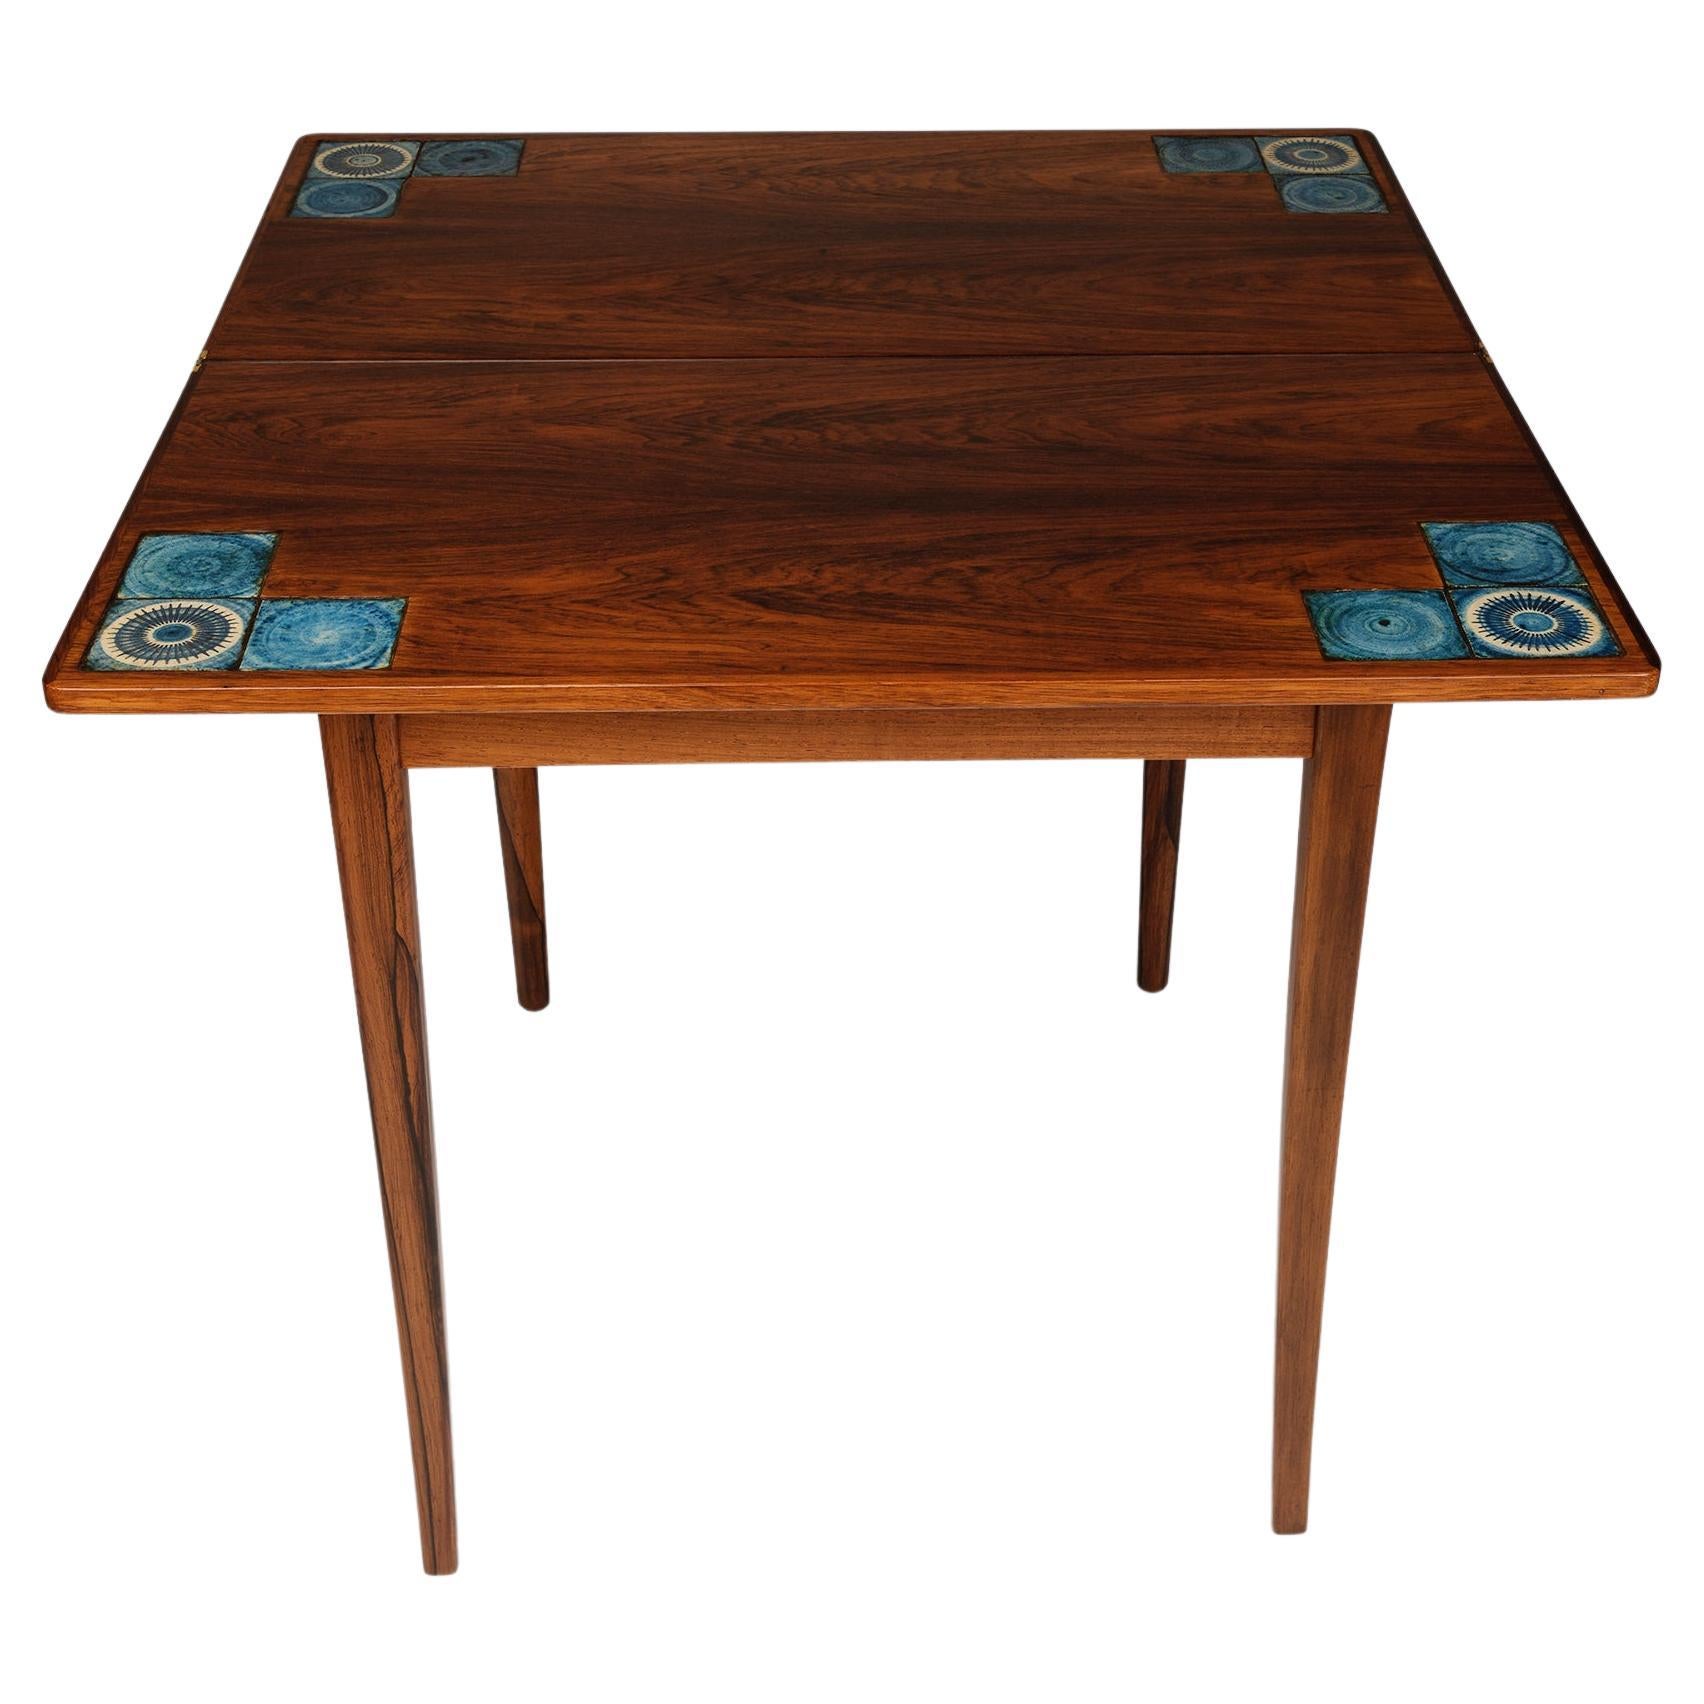 Danish foldable rosewood games card table with blue toned tiles For Sale